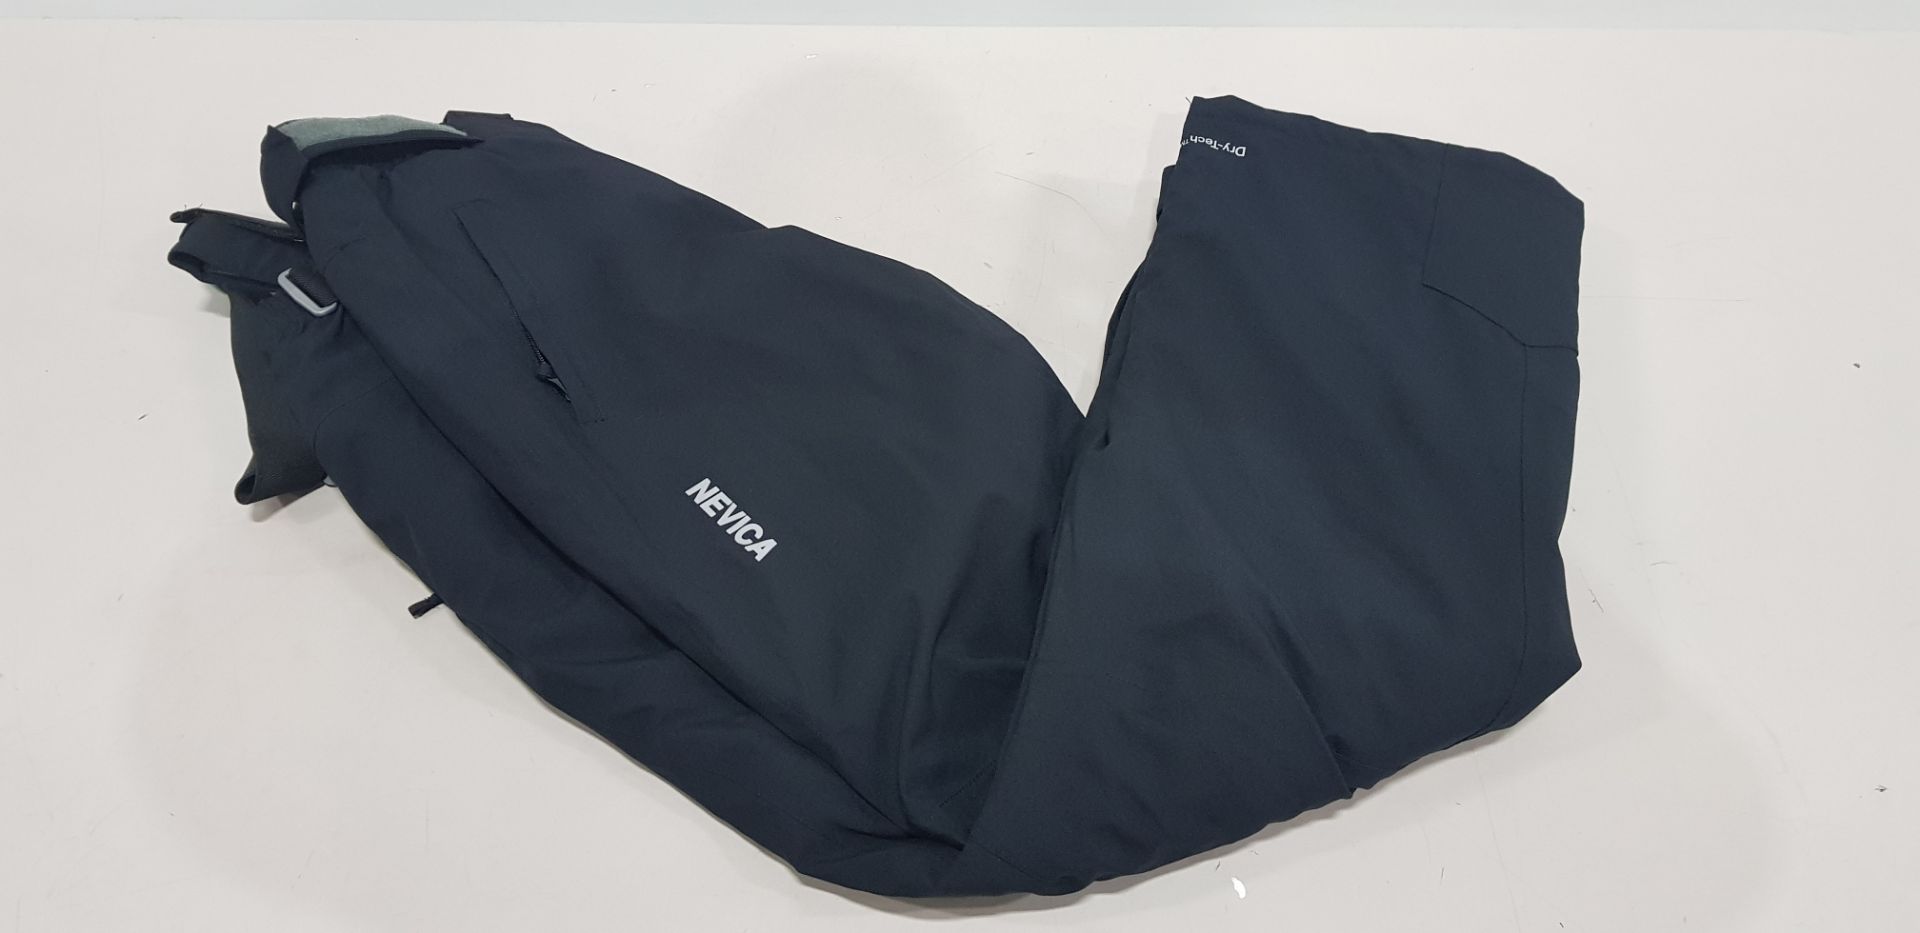 5 X BRAND NEW SKI PANTS IN VARIOUS STYLES AND SIZES TO INCLUDE 1 X NEVICA PERFORMANCE NAVY SKI PANTS